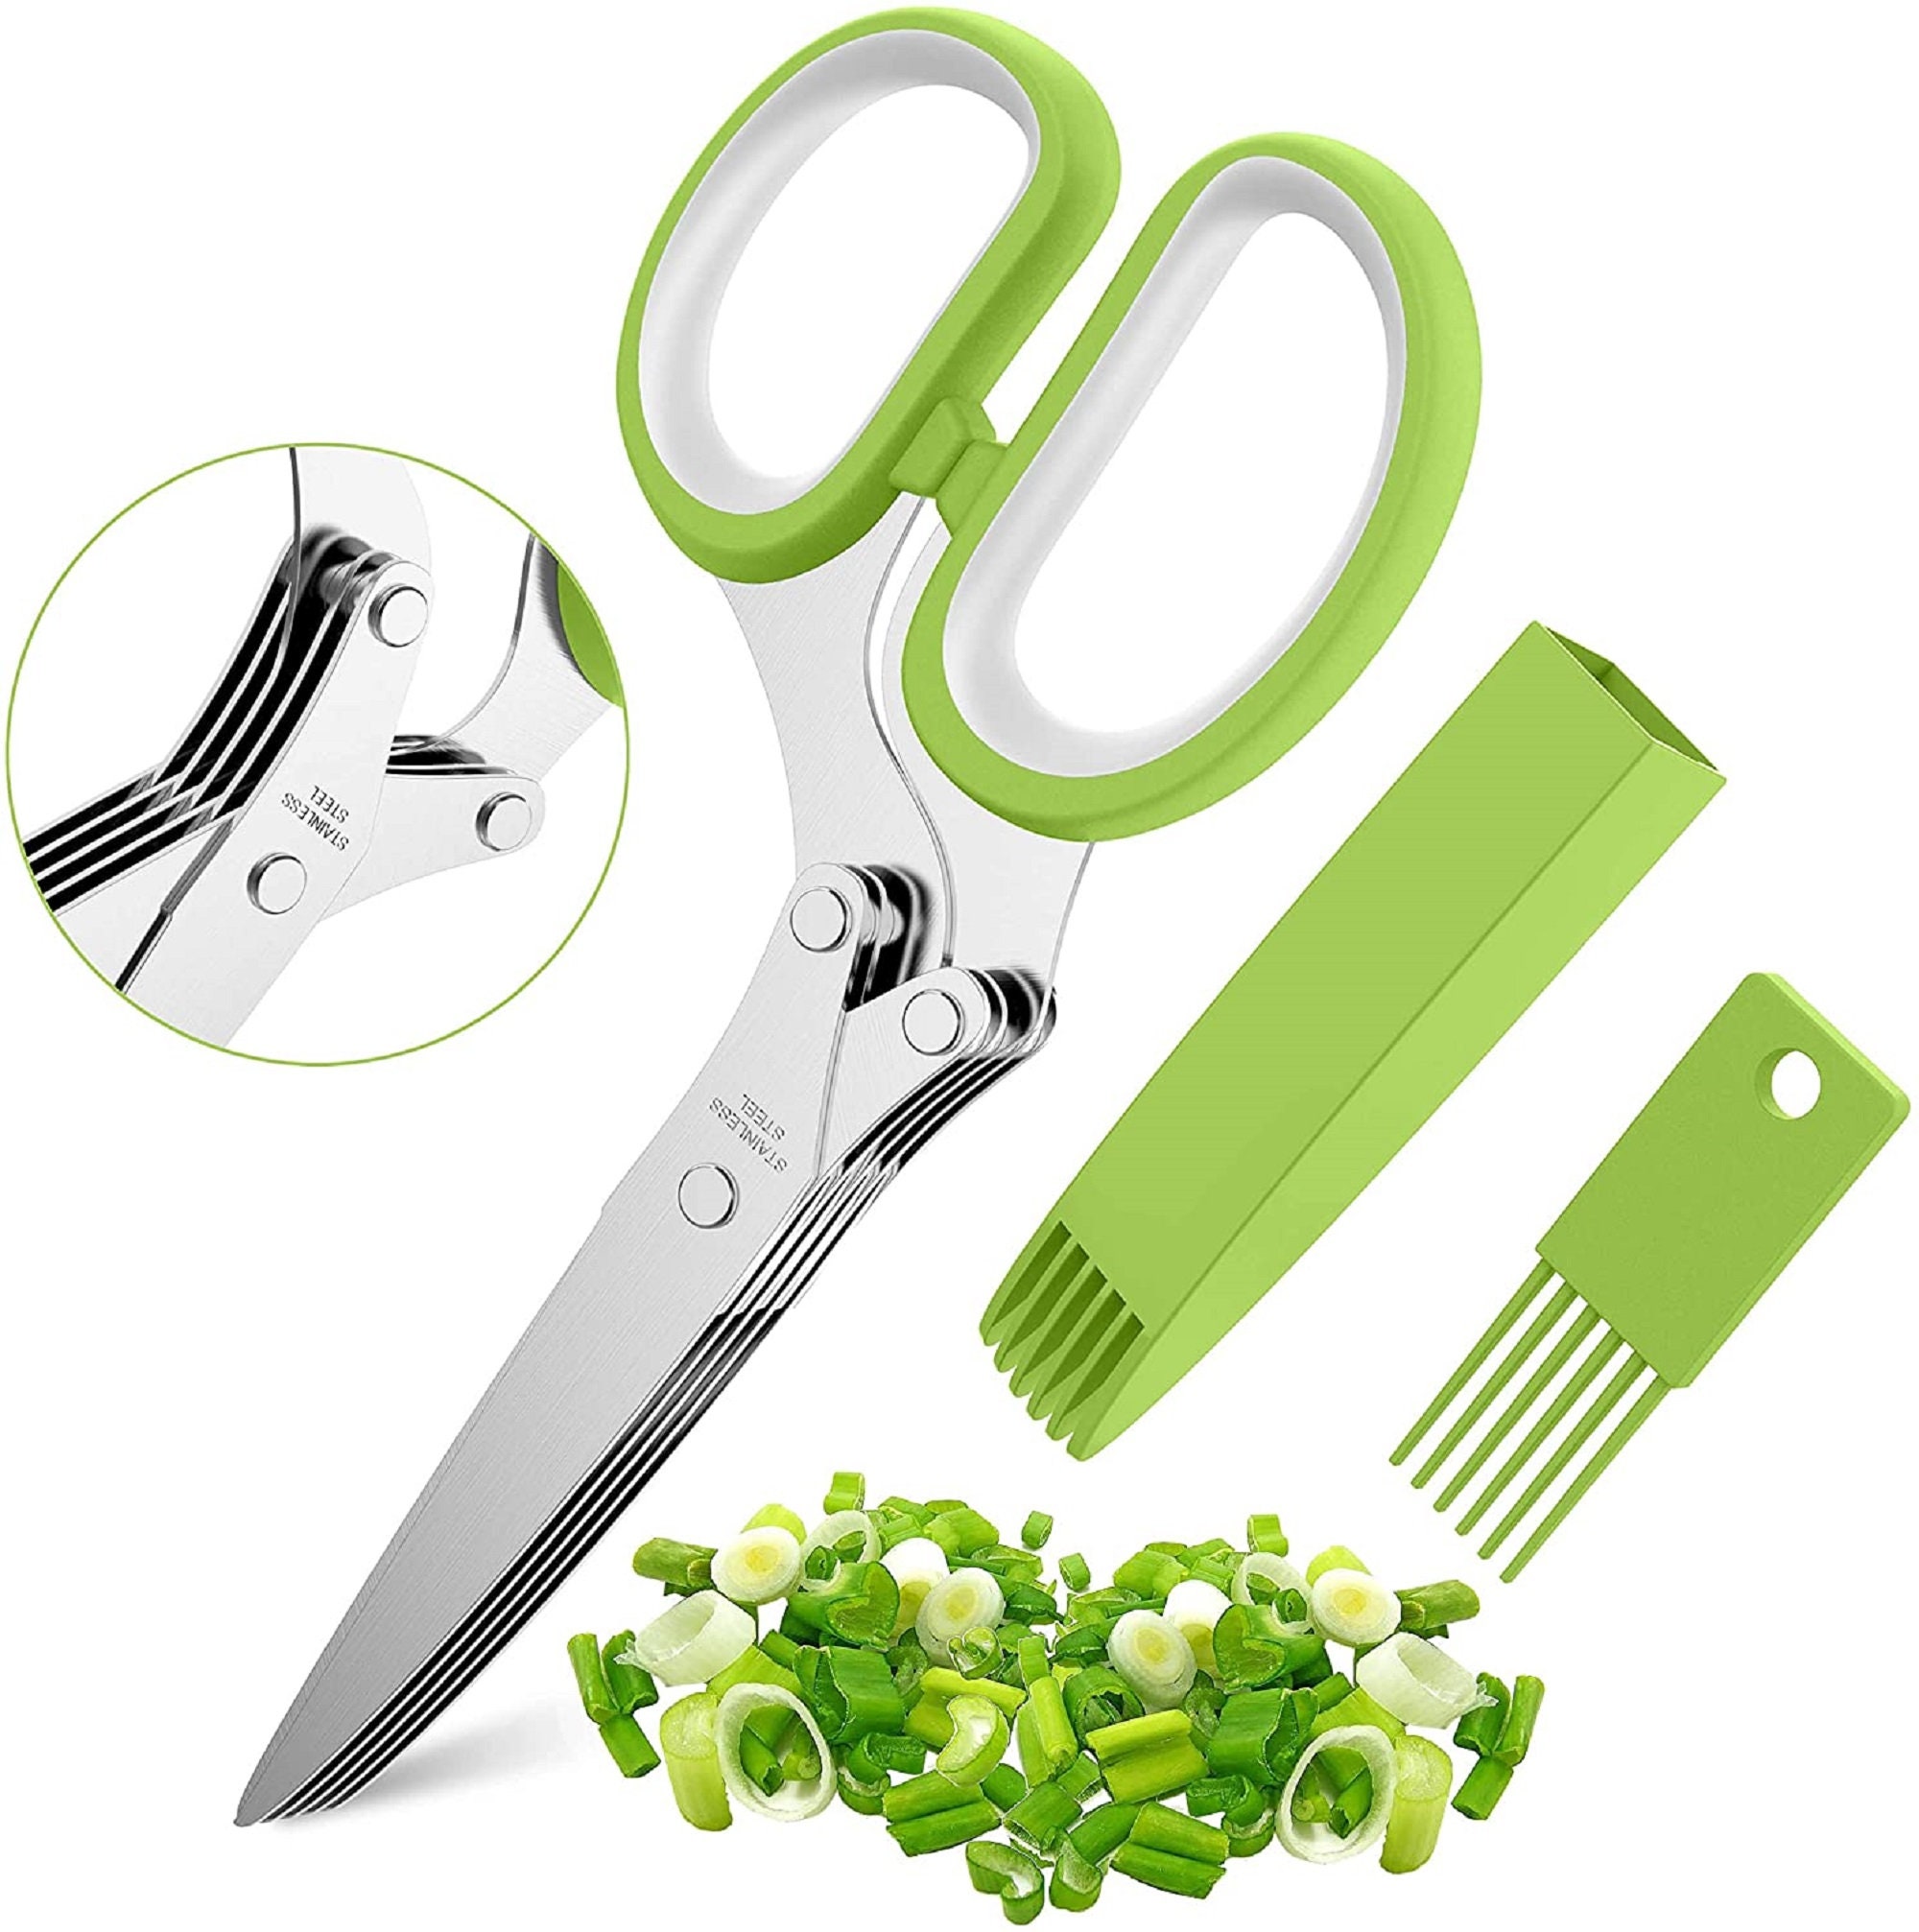 Upgrade Your Kitchen with 2023 Updated 5-Blade and Cover Herb Scissors - Food Cutter Chopper Herb Cutter Shears and Vegetable Cutter Scissors for